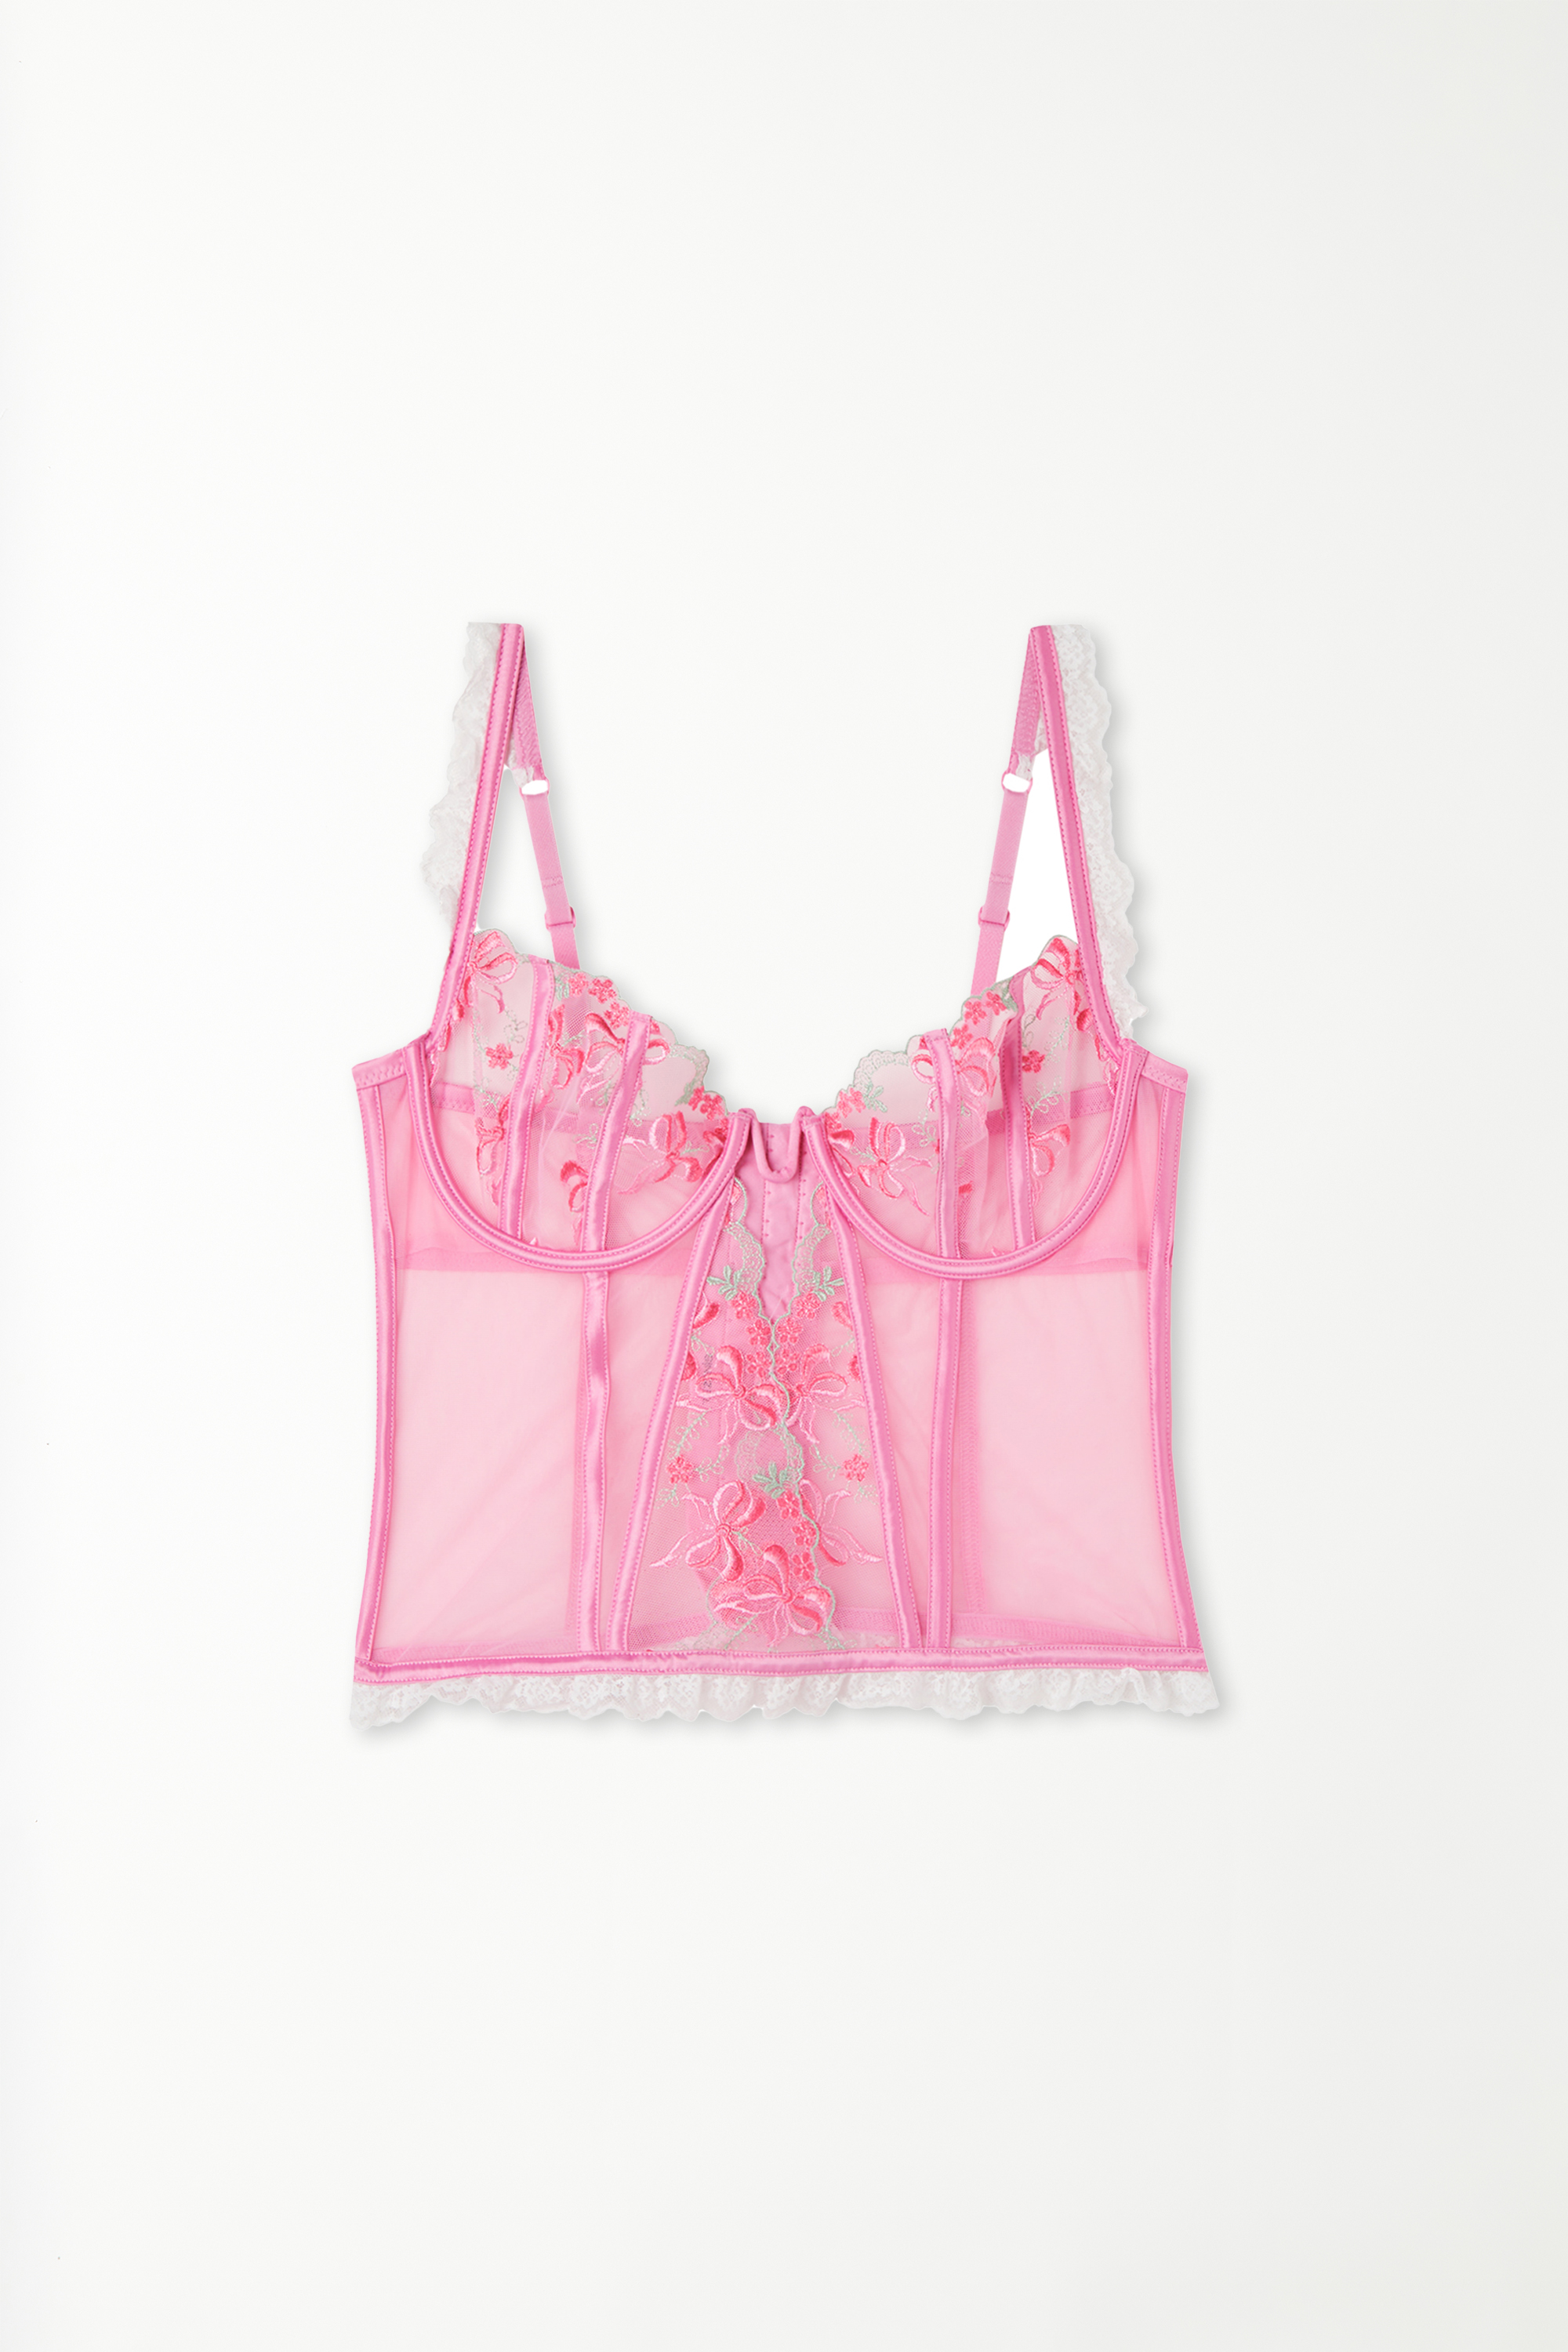 Pink Candy Lace Balconette Bra Top Corset